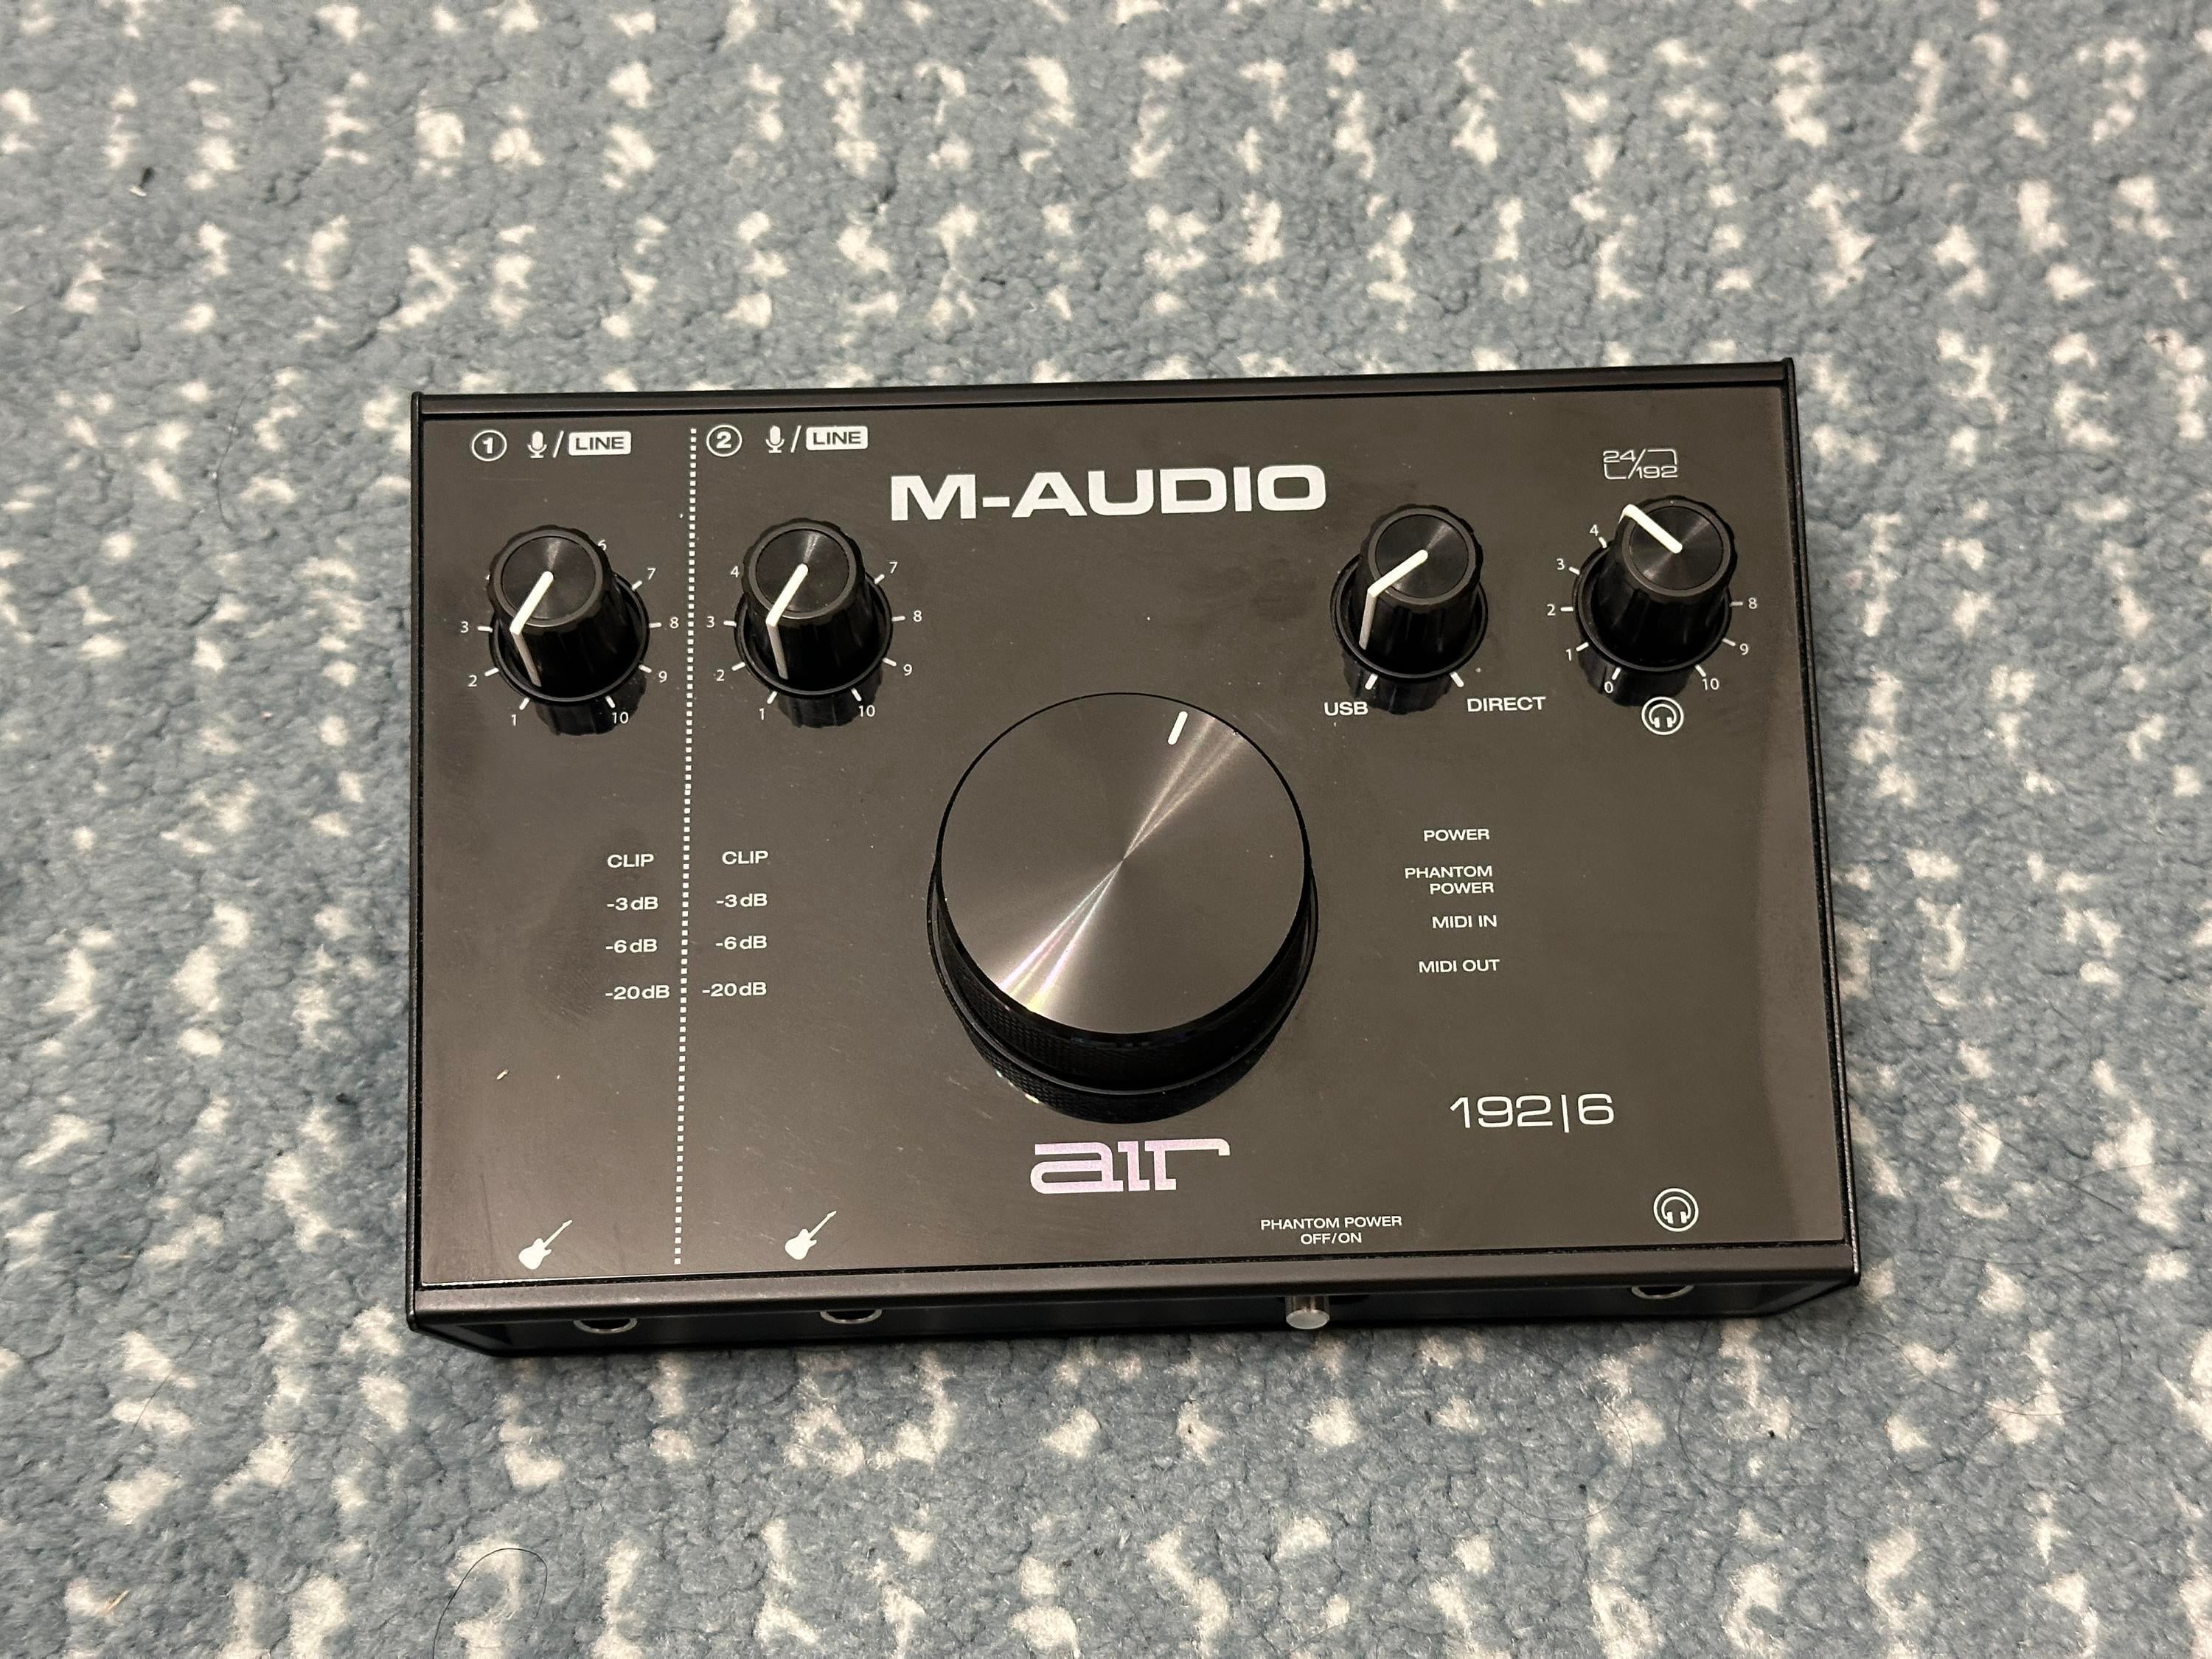 Used M-Audio AIR 192|6 USB Audio Interface - Sweetwater's Gear 